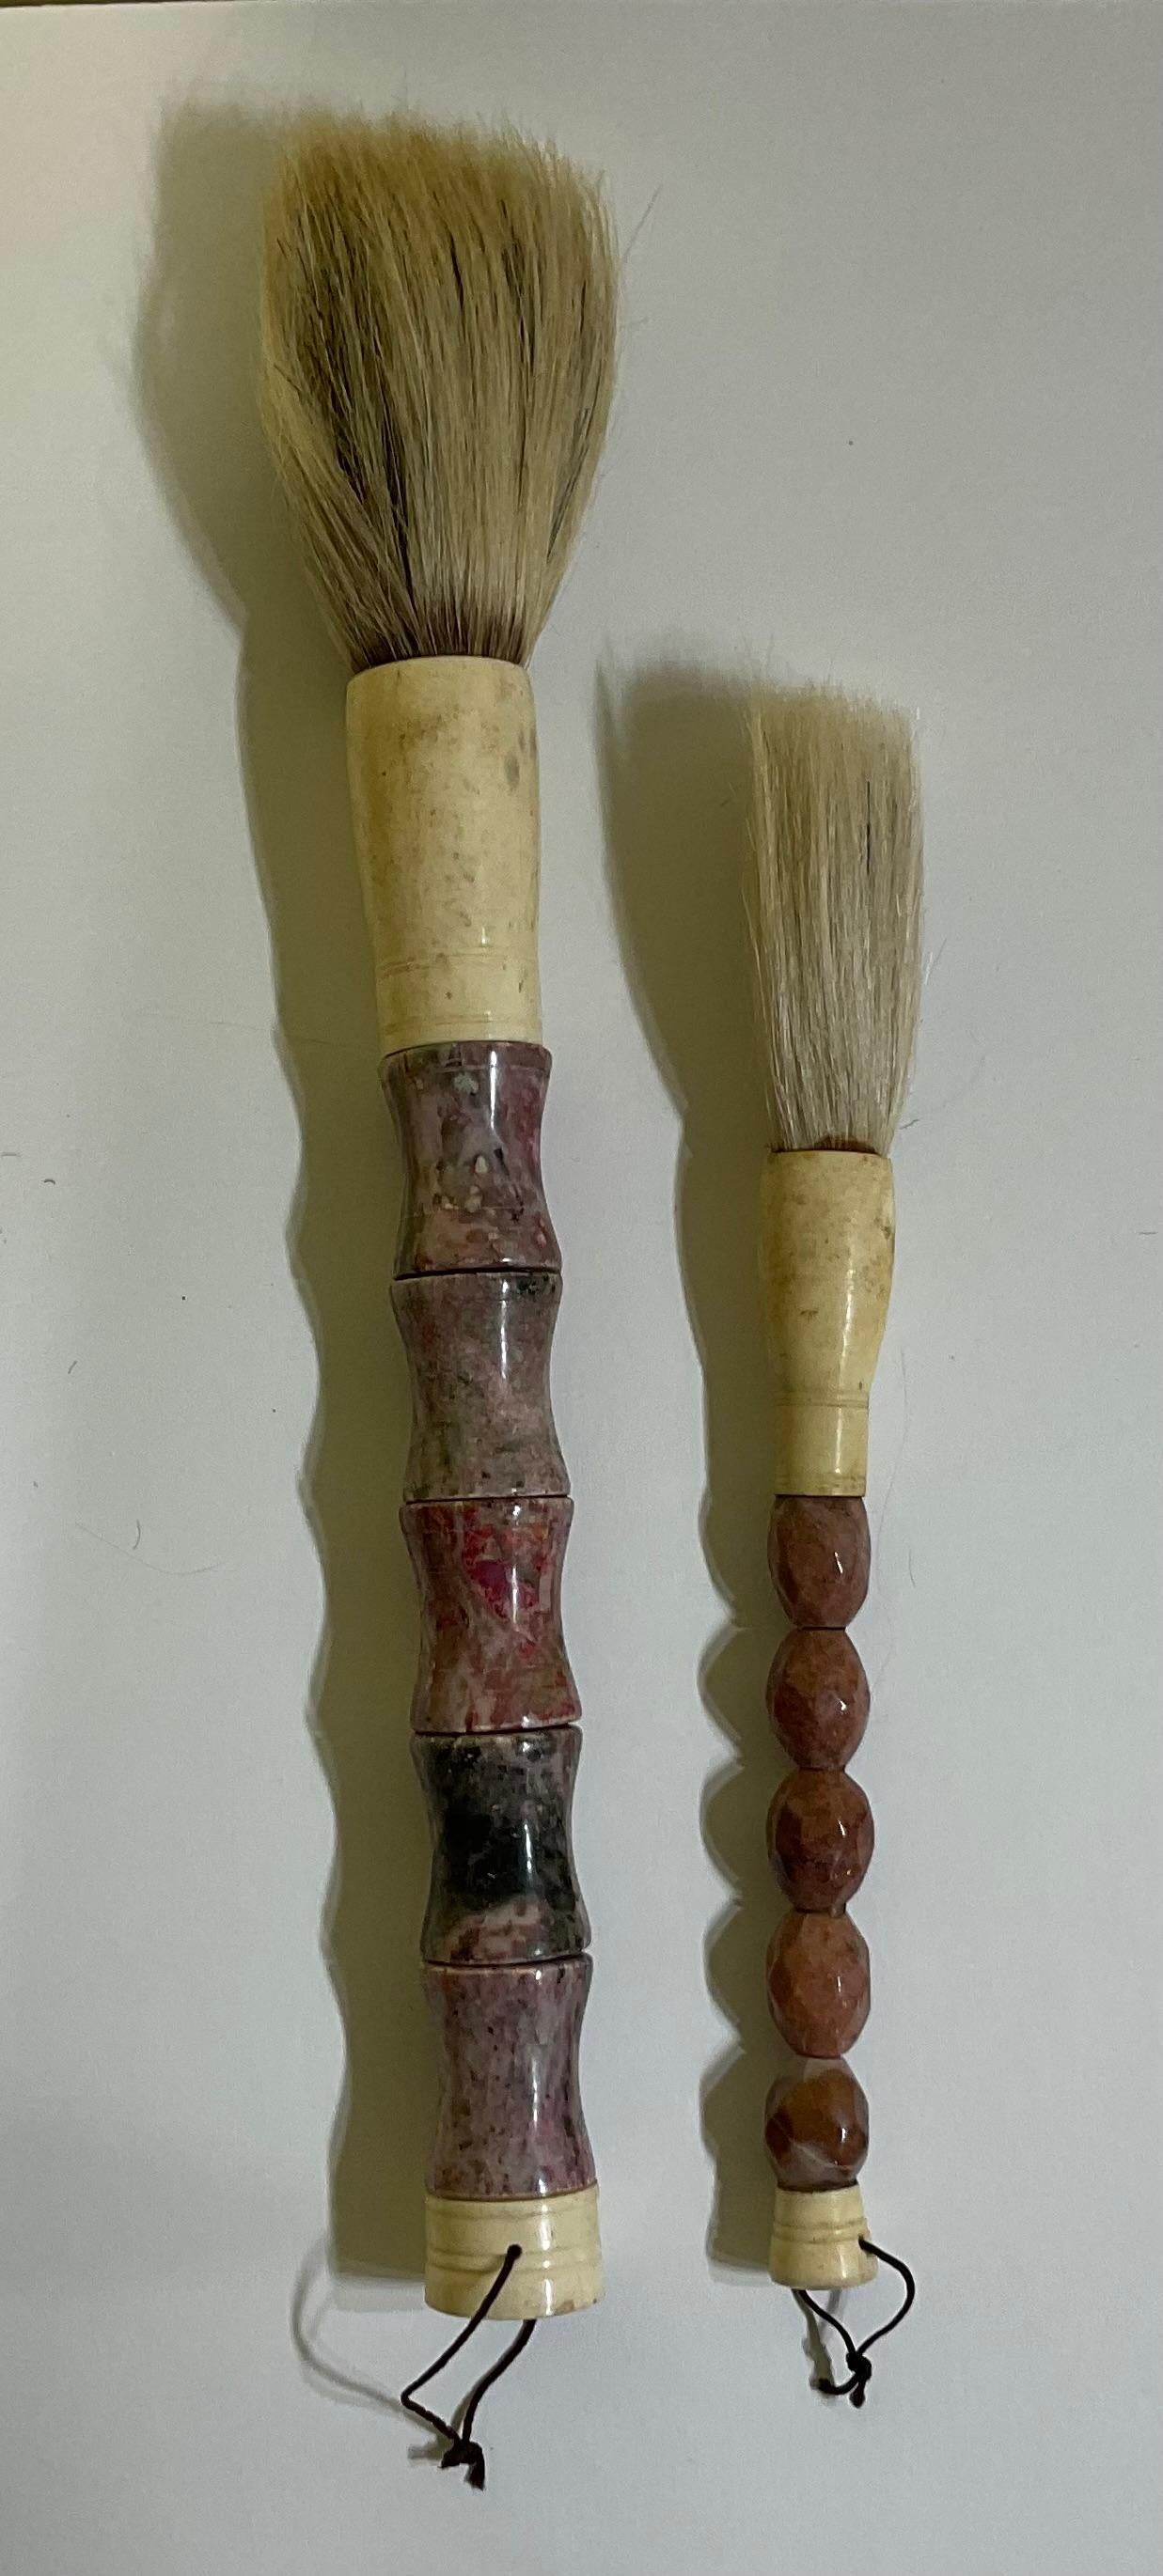 Beautiful pair of hand made calligraphy brushes with soft wine colors ,marble beads ,bone , ferrule and horse hair. 
 Slight variation in each brush due to characteristics of genuine stone and bone.
Brash size :
1.  15” x 1,25
2. 11” x 0.75